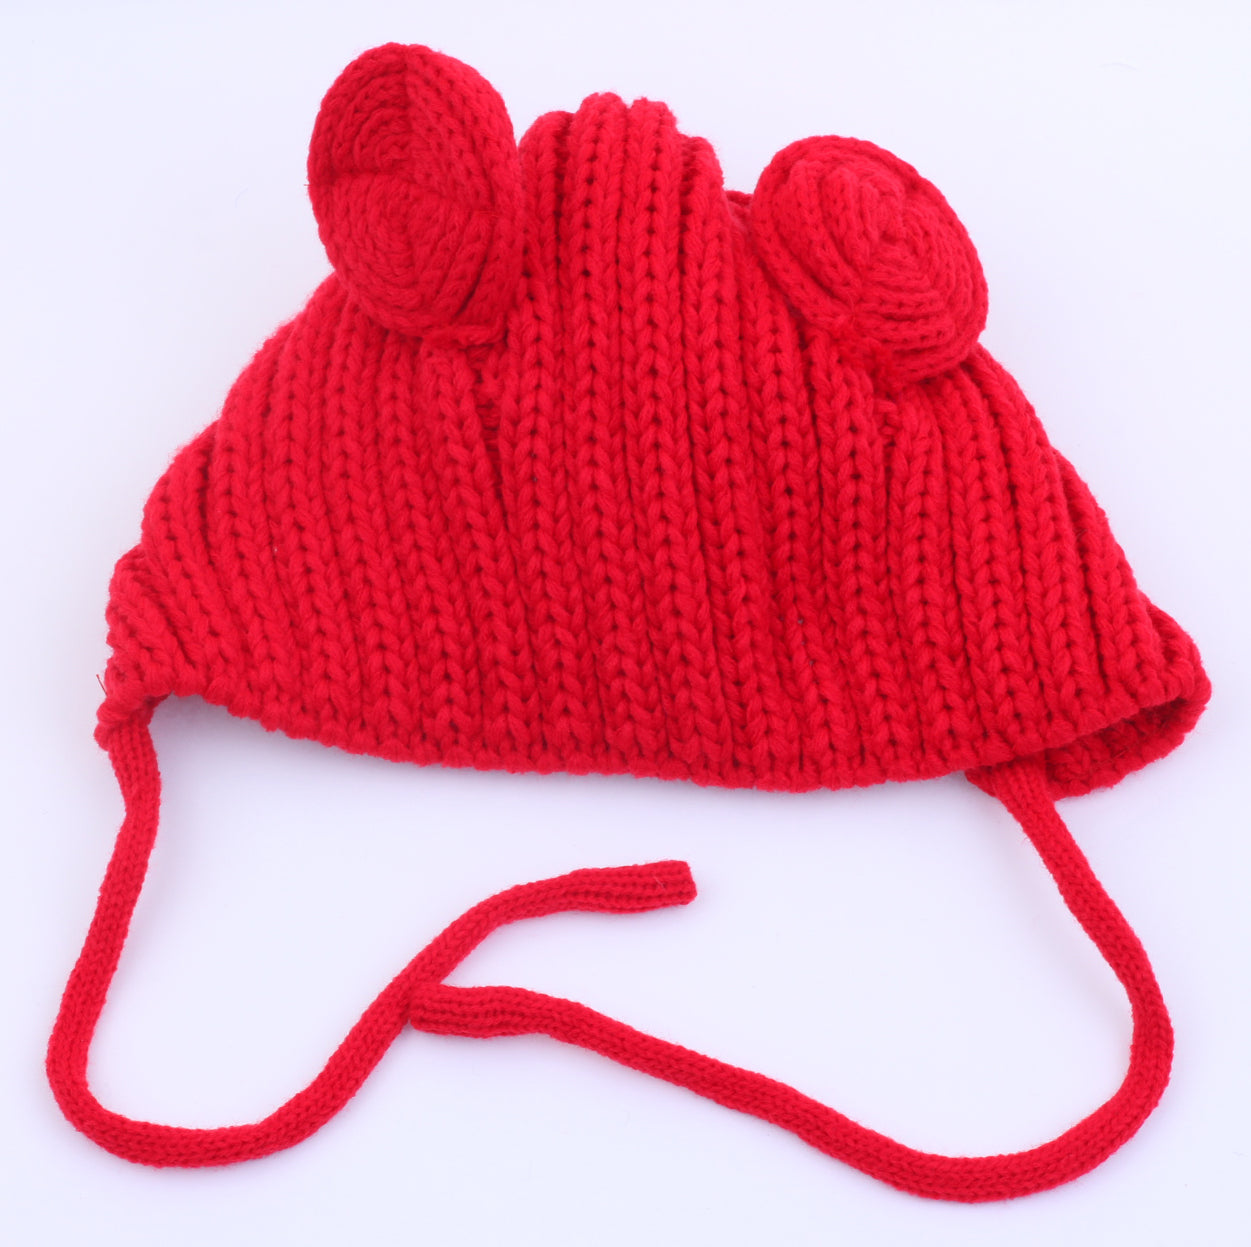 Red Cute Ears Sweater Knitted Hats Beanies